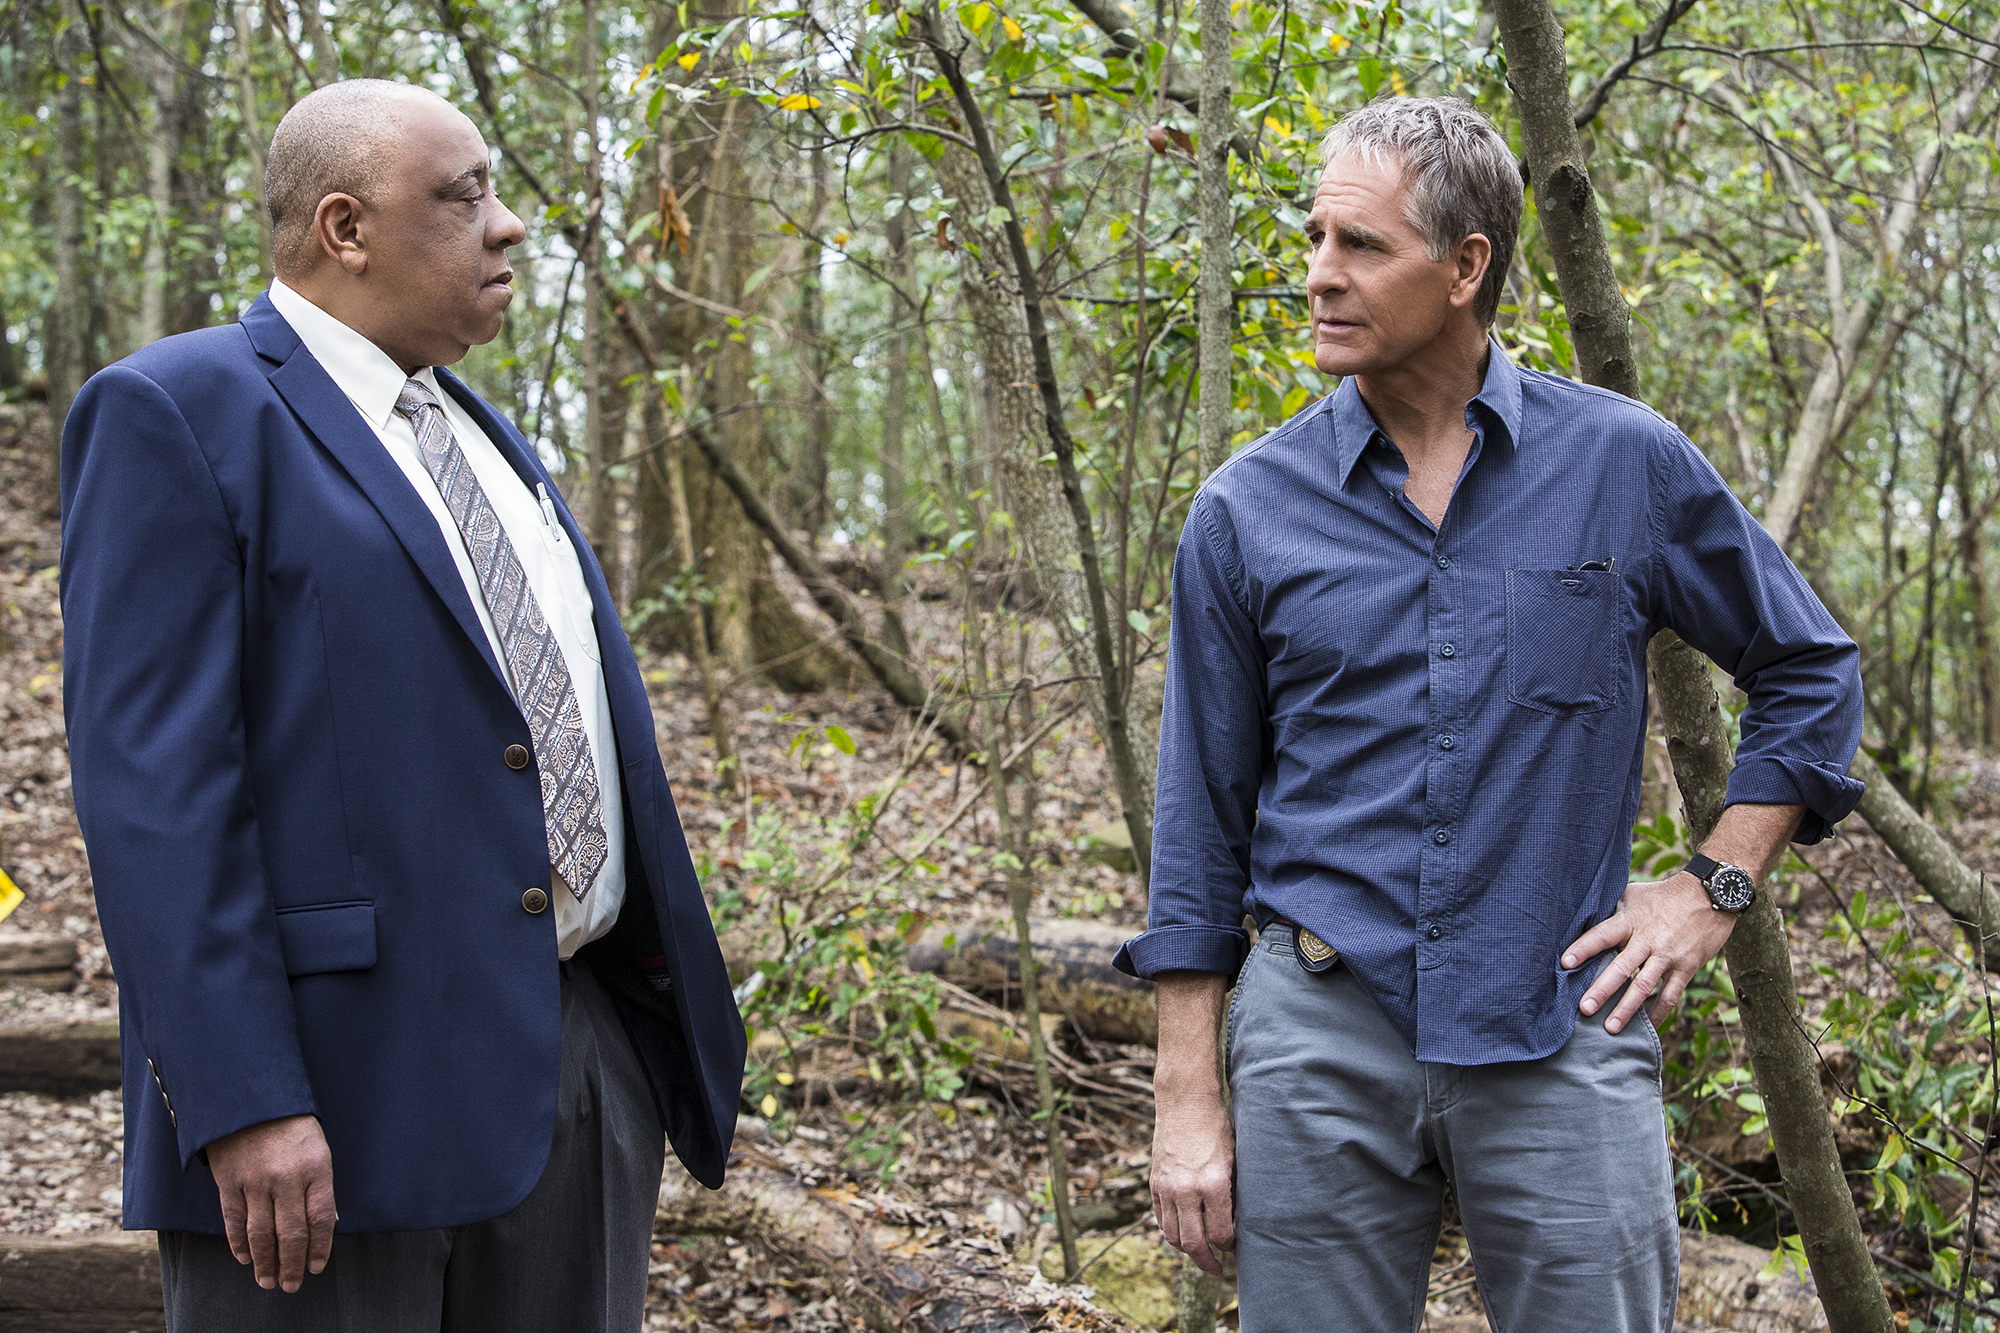 Barry Shabaka Henley as Baton Rogue Detective Todd Lamont and Scott Bakula as Special Agent Dwayne Pride